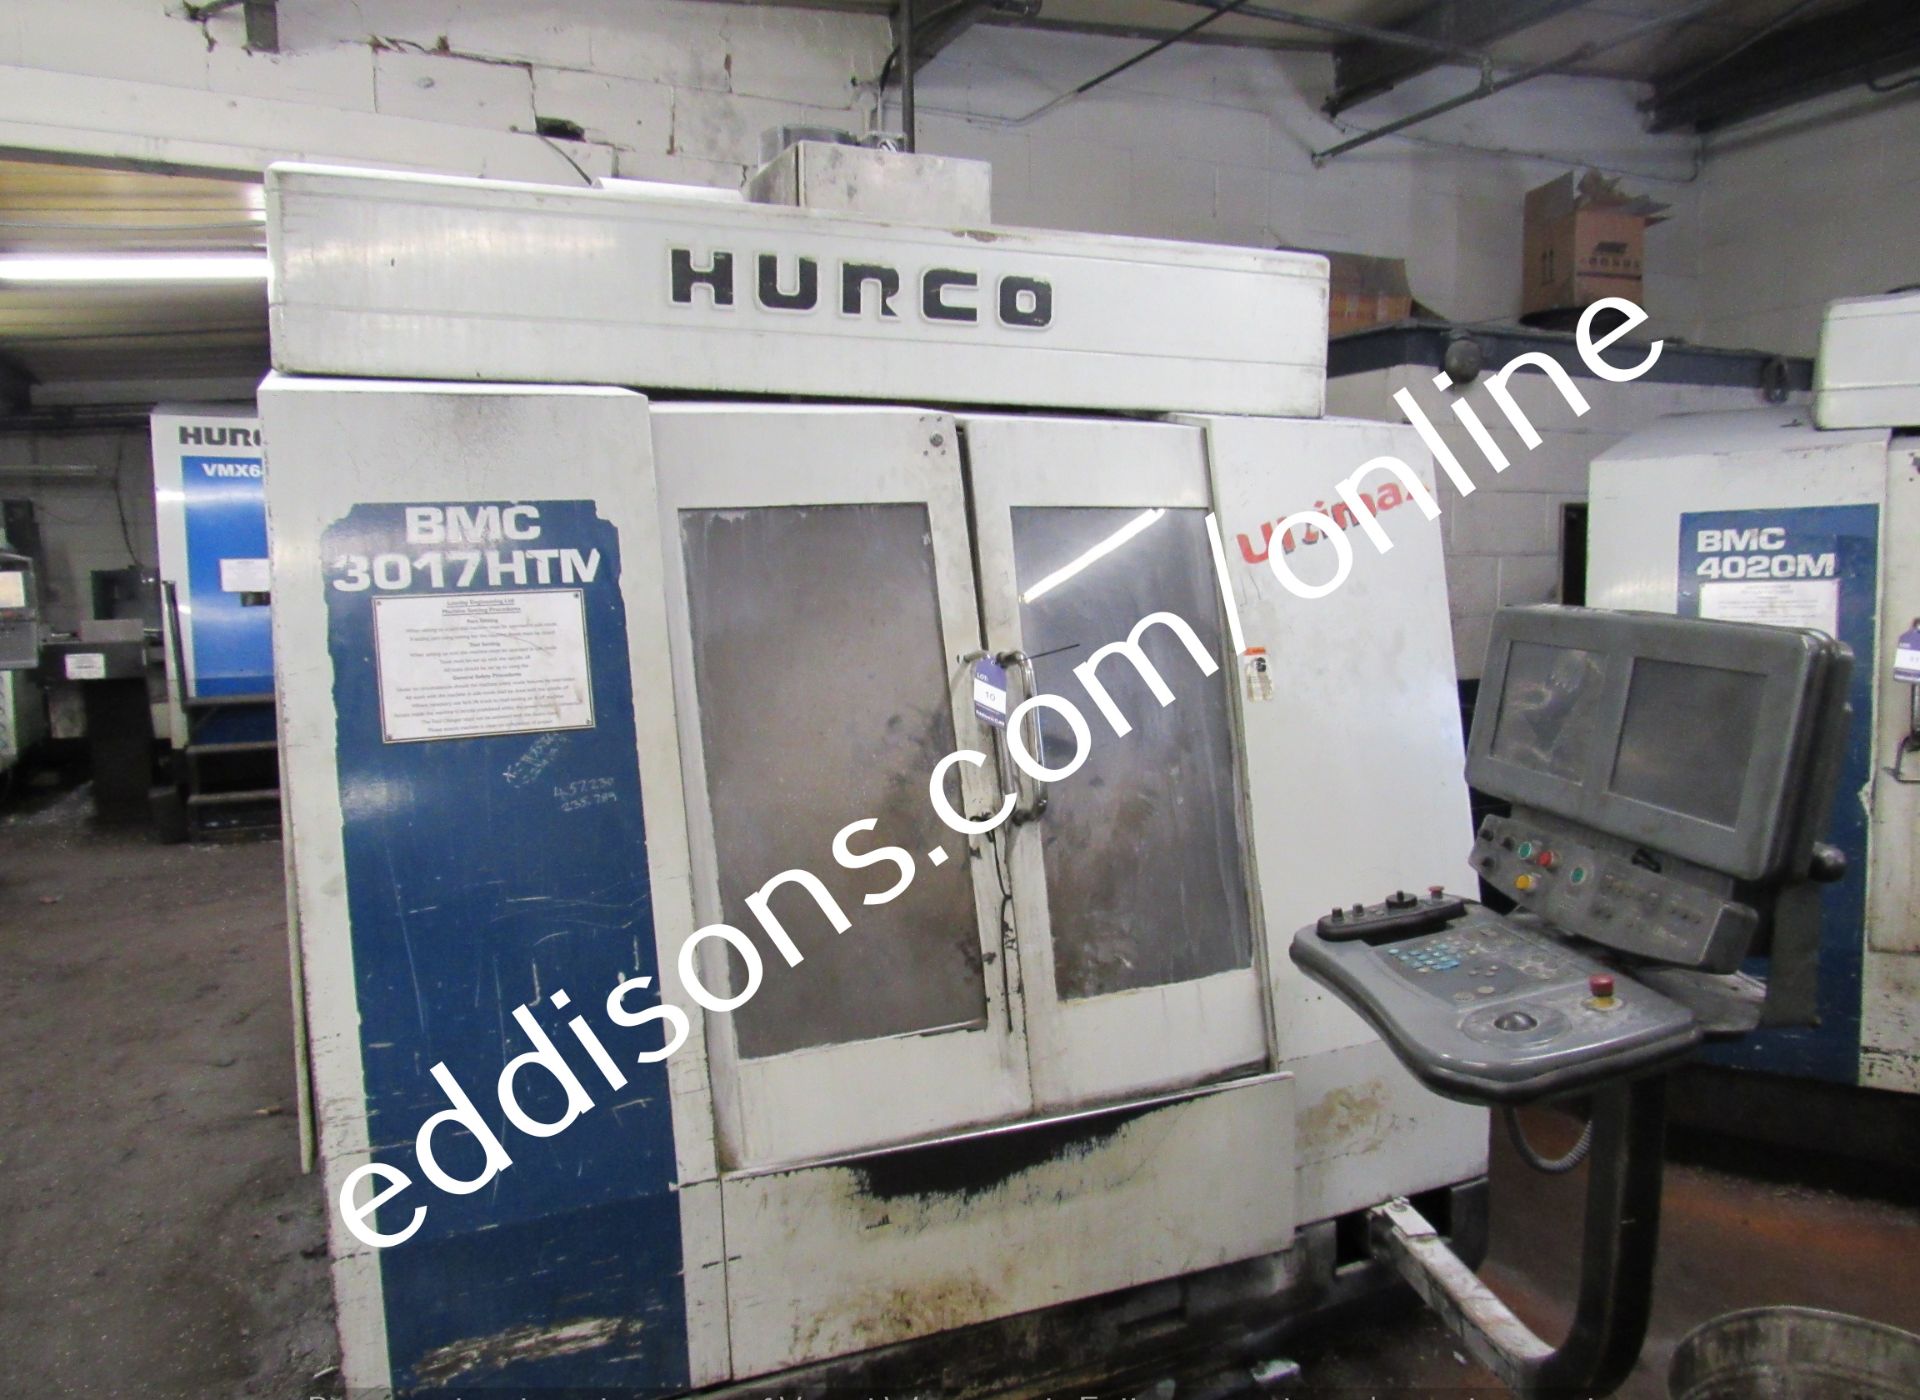 Hurco Ultimax BMC 3017HTM (762mm x 460mm bed limit), with 24 Station Tool Changer, 1997, Serial - Image 2 of 11